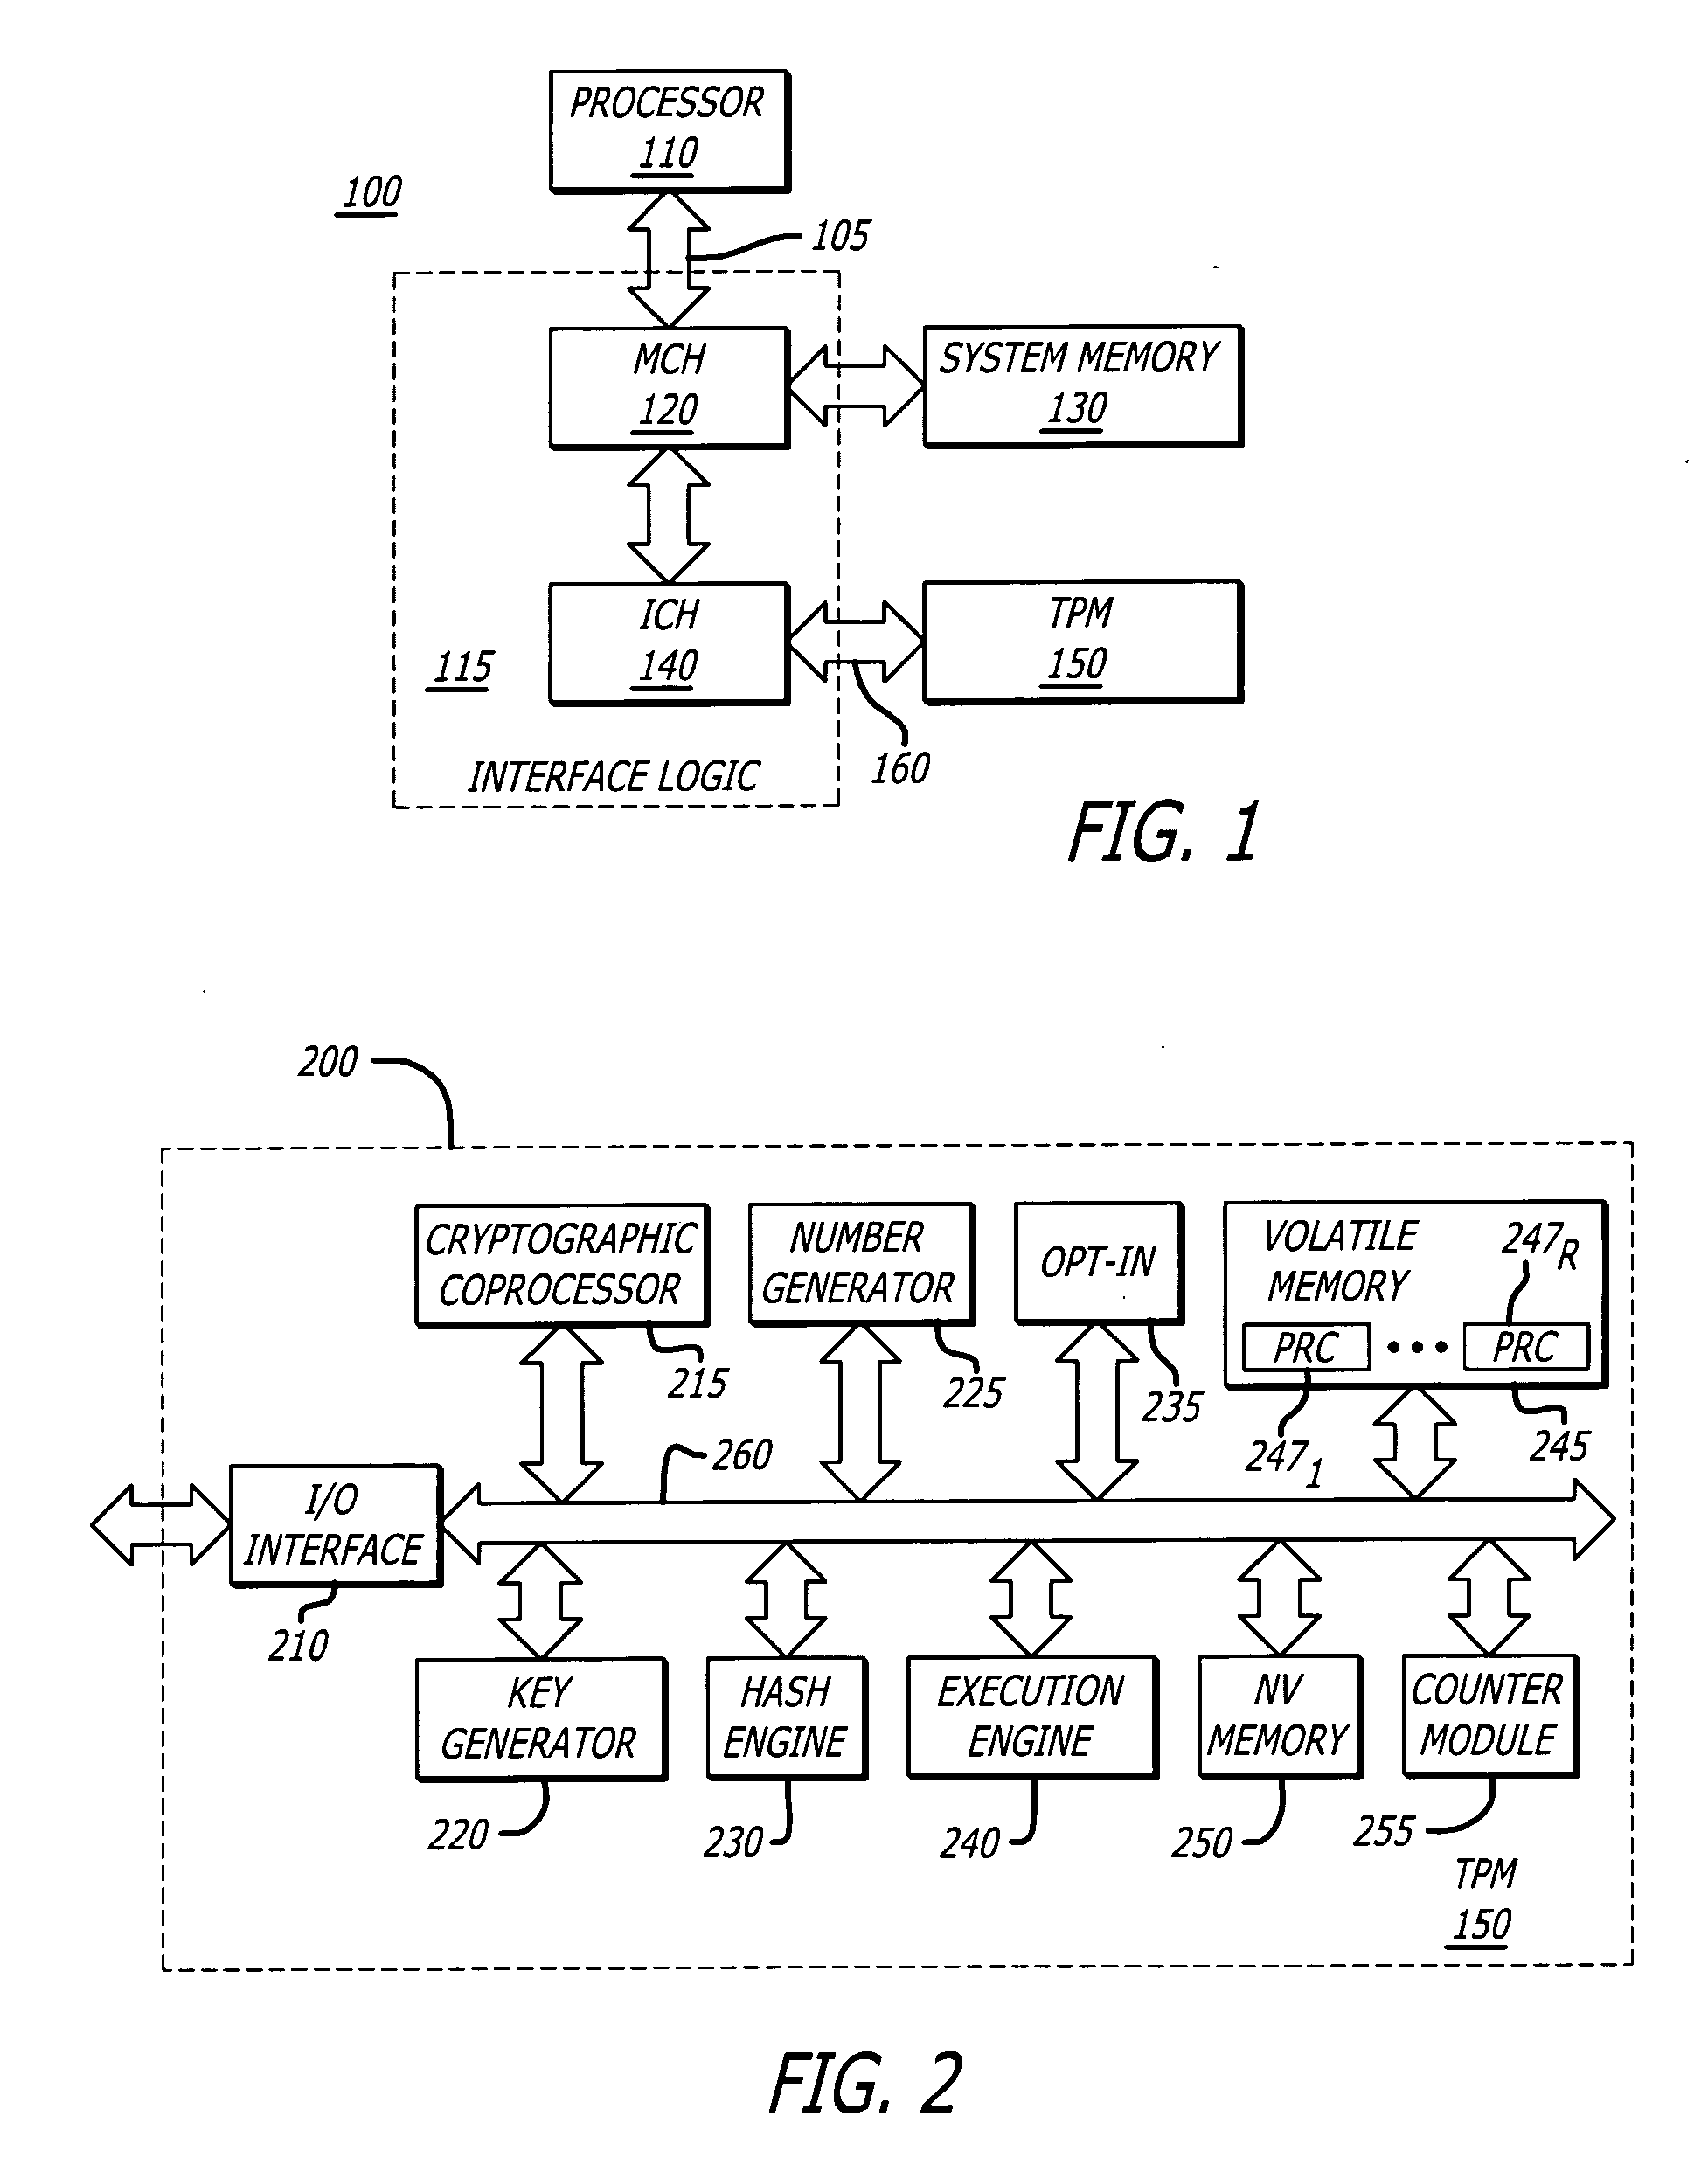 Method for providing integrity measurements with their respective time stamps